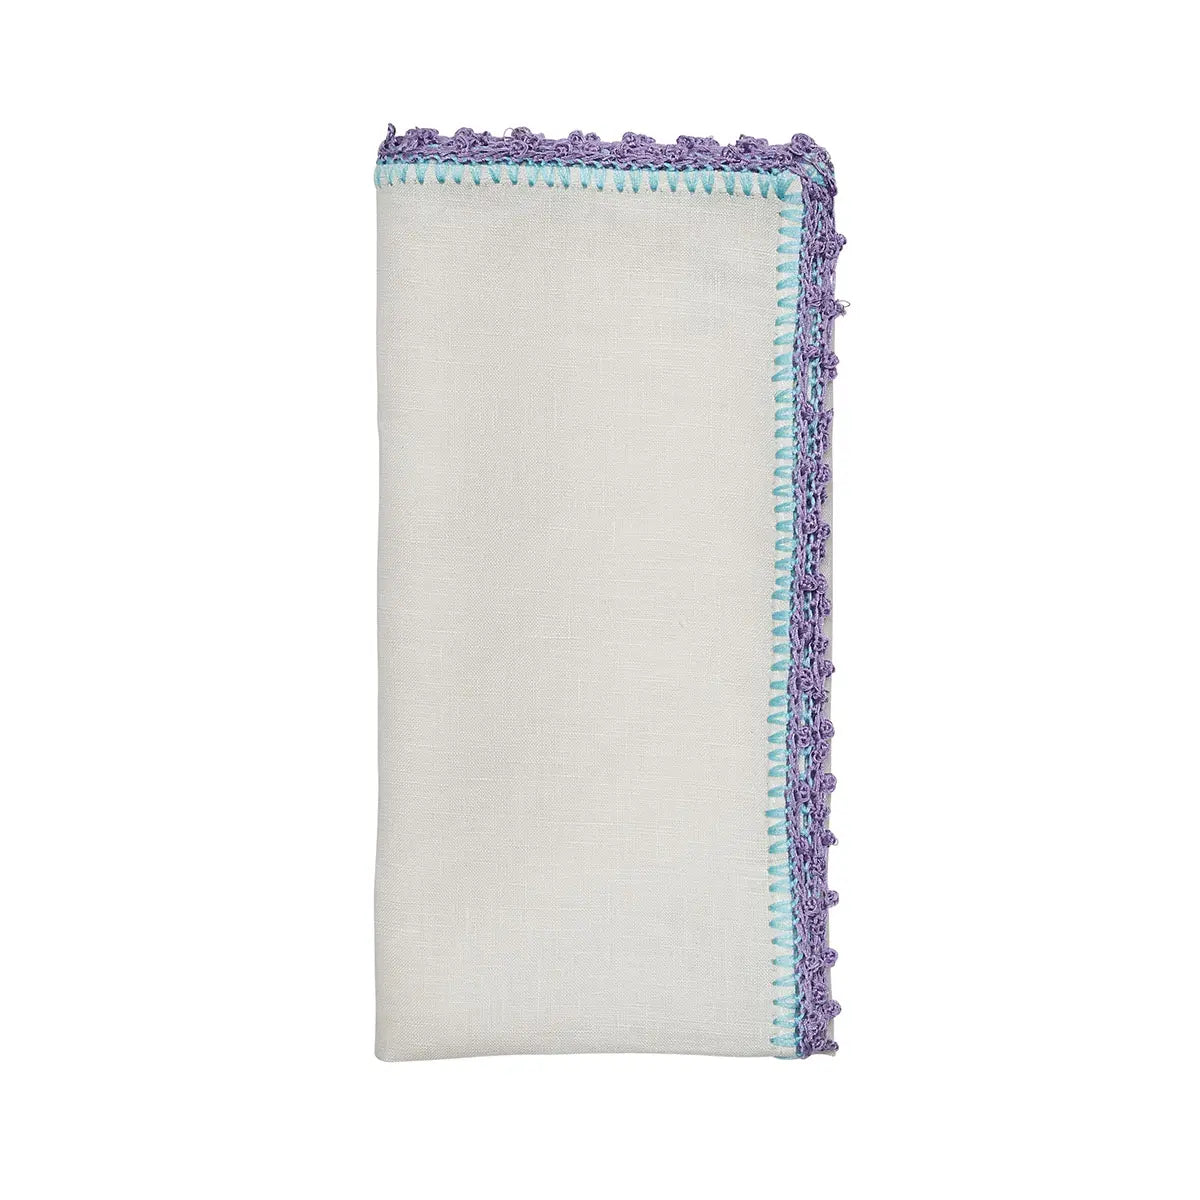 Kim Seybert Knotted Edge Napkin in White Lilac and Blue